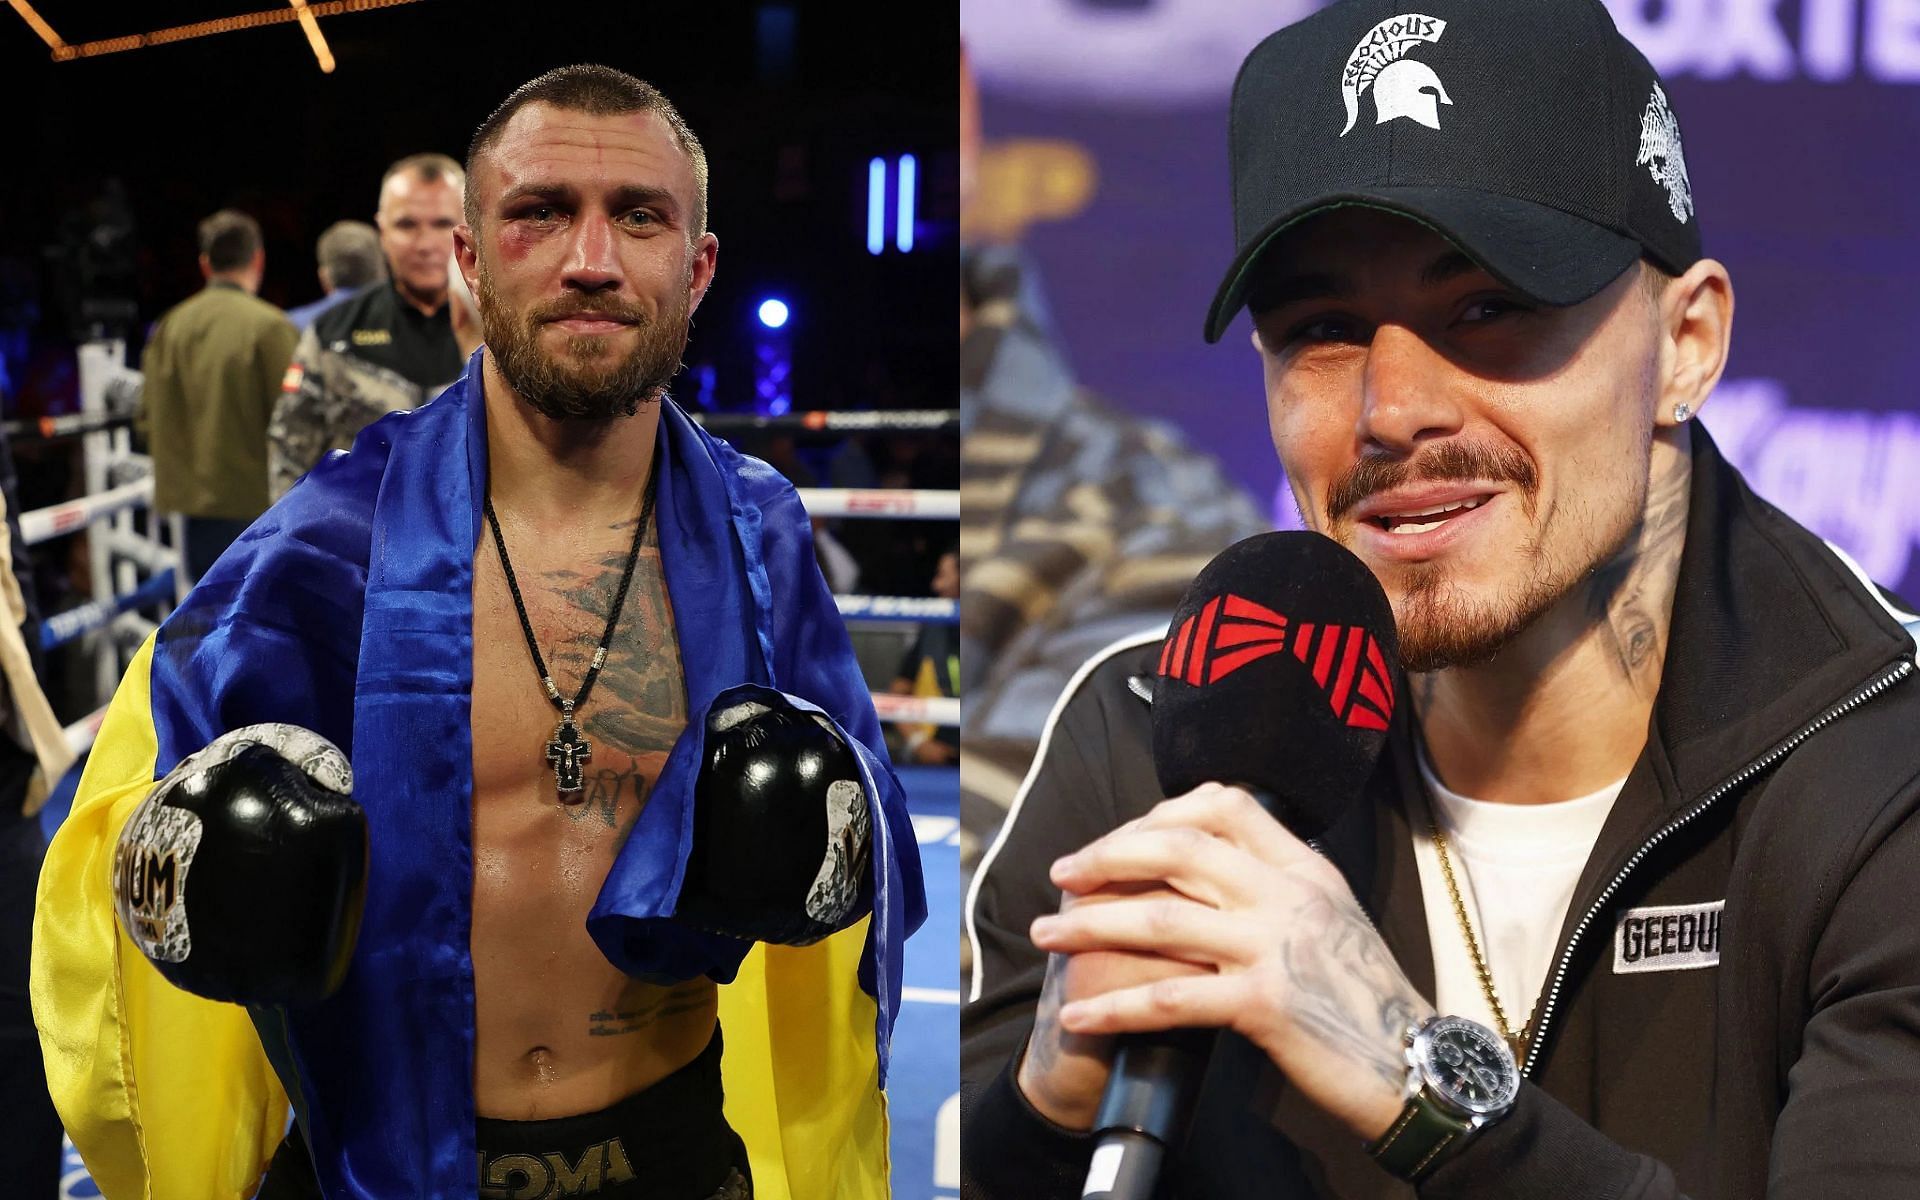 George Kambosos Jr. (right) discusses his loss to Vasily Lomachenko (left) [Images Courtesy: @GettyImages]